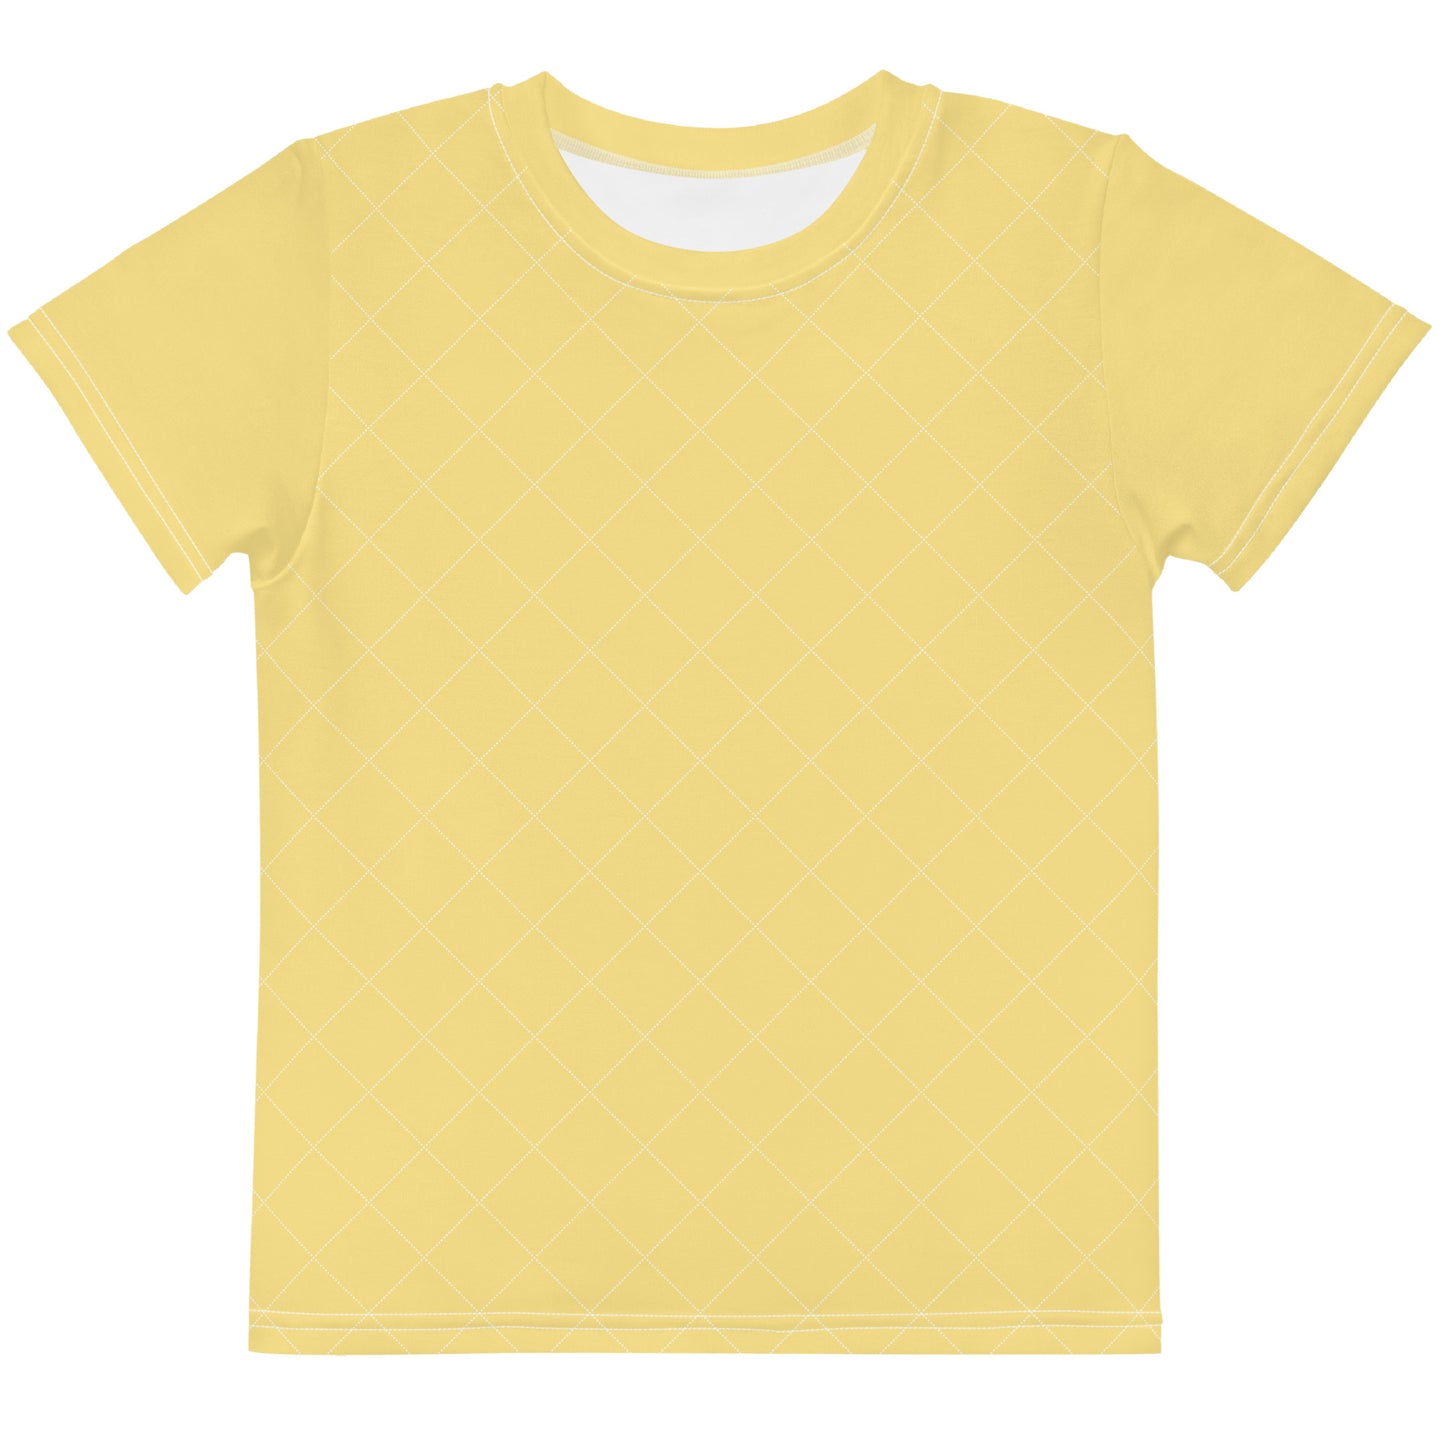 Parmesan - Sustainably Made Kids T-Shirt